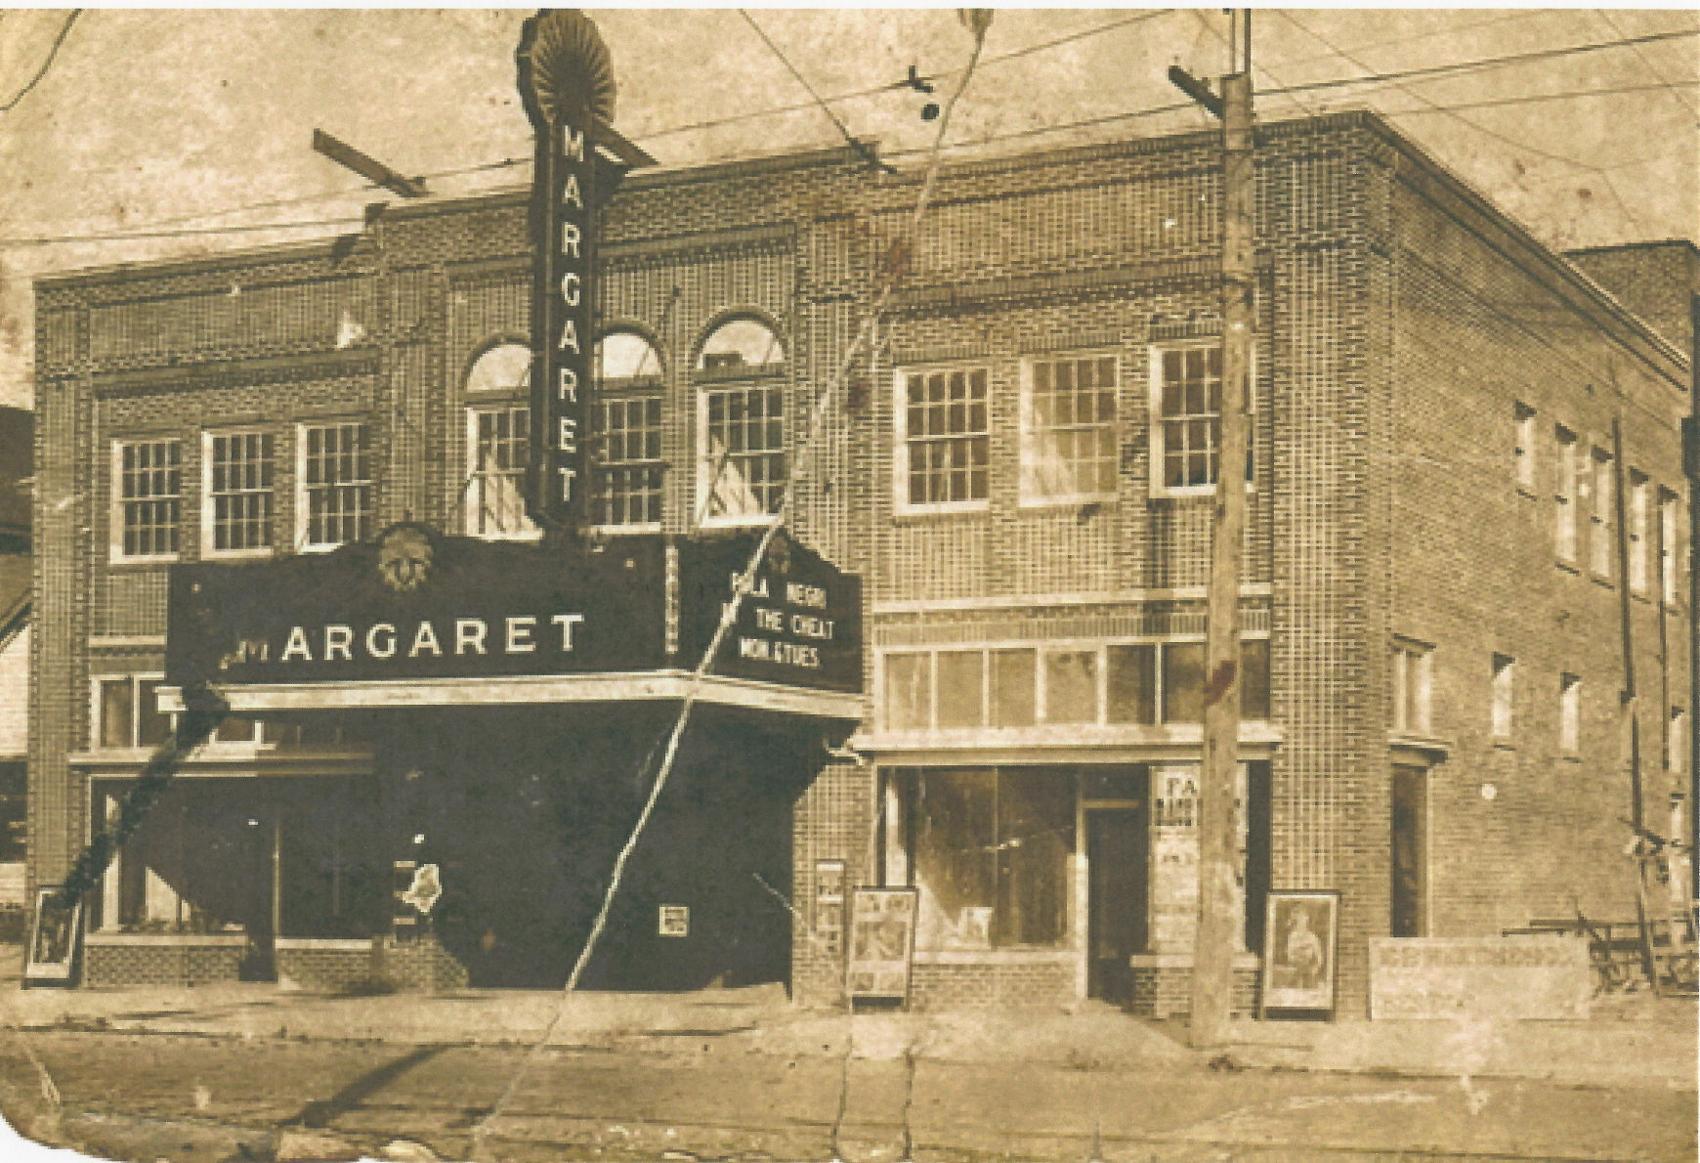 The Margaret Theater, showing "The Cheat" 